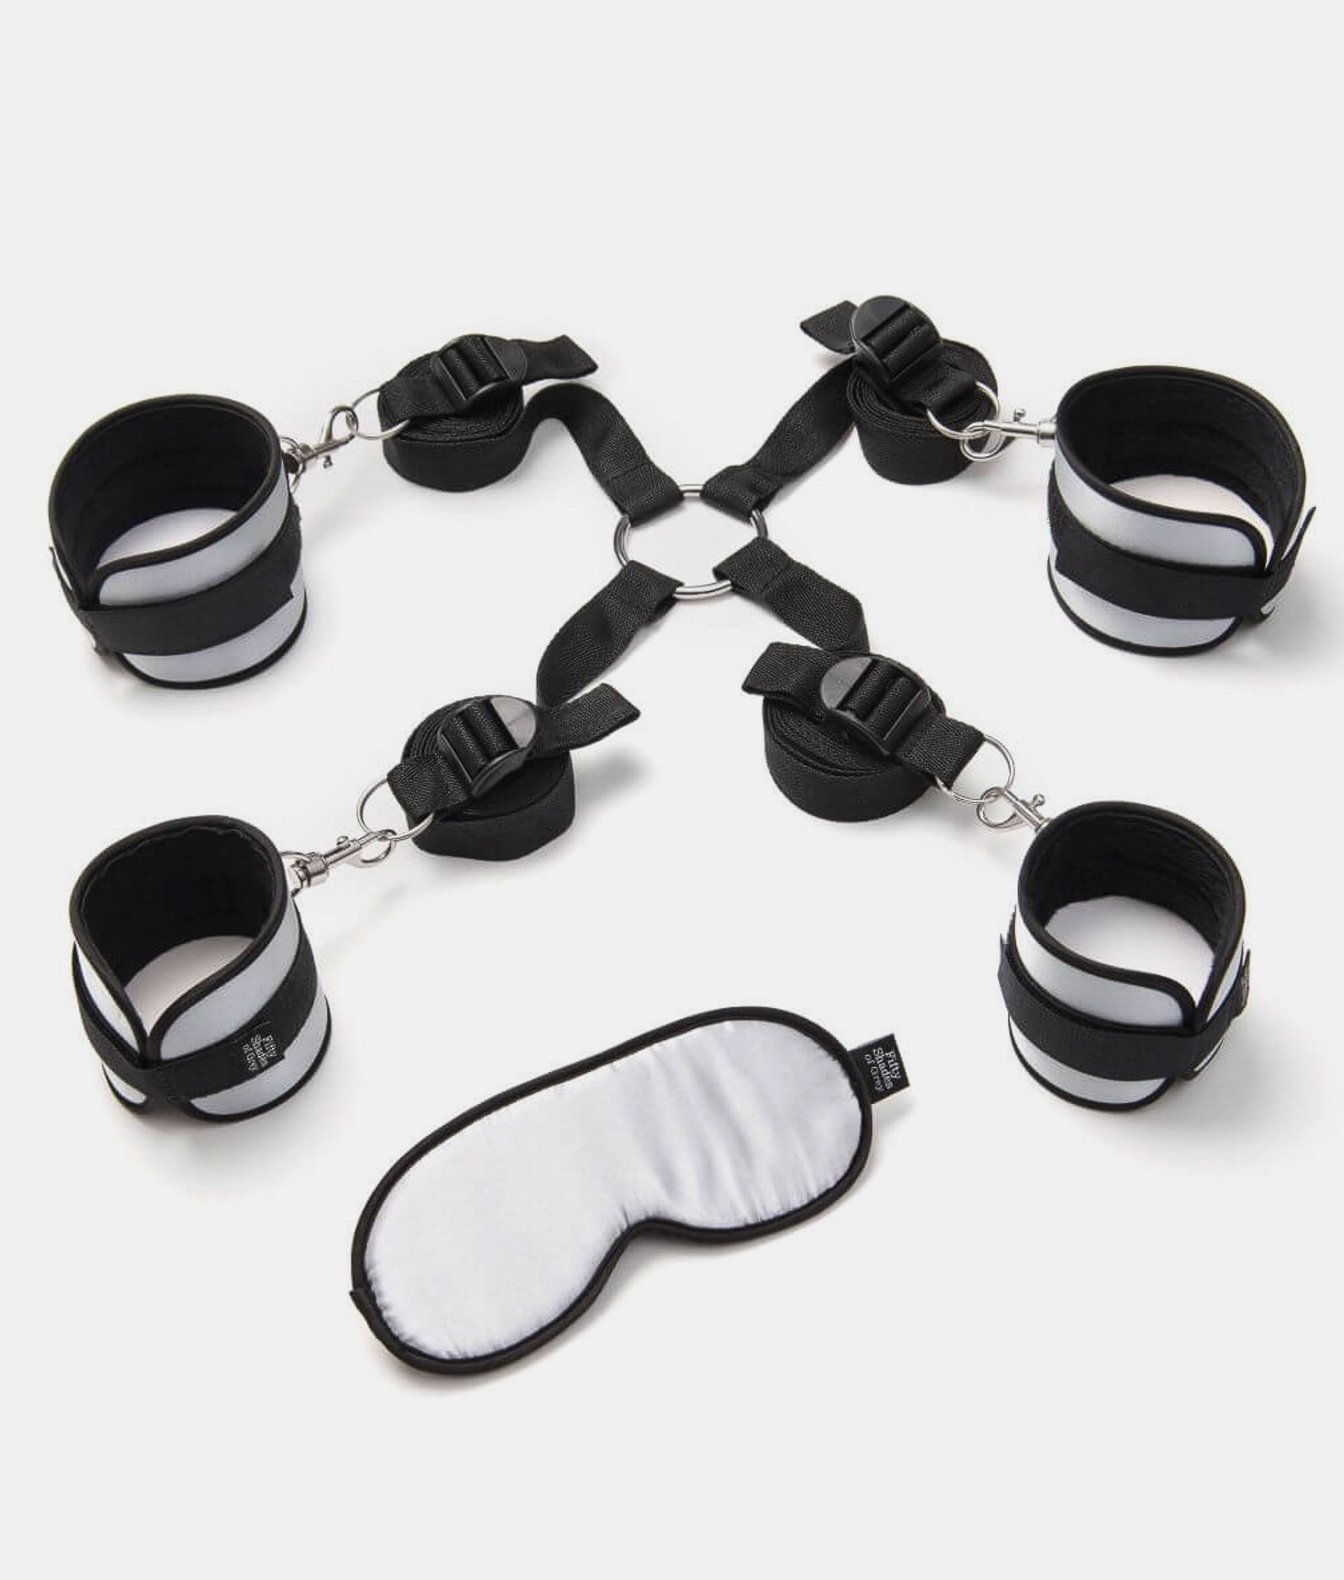 Fifty Shades of Grey The Official Pleasure Collection Hard Limits Bed Restraint Kit